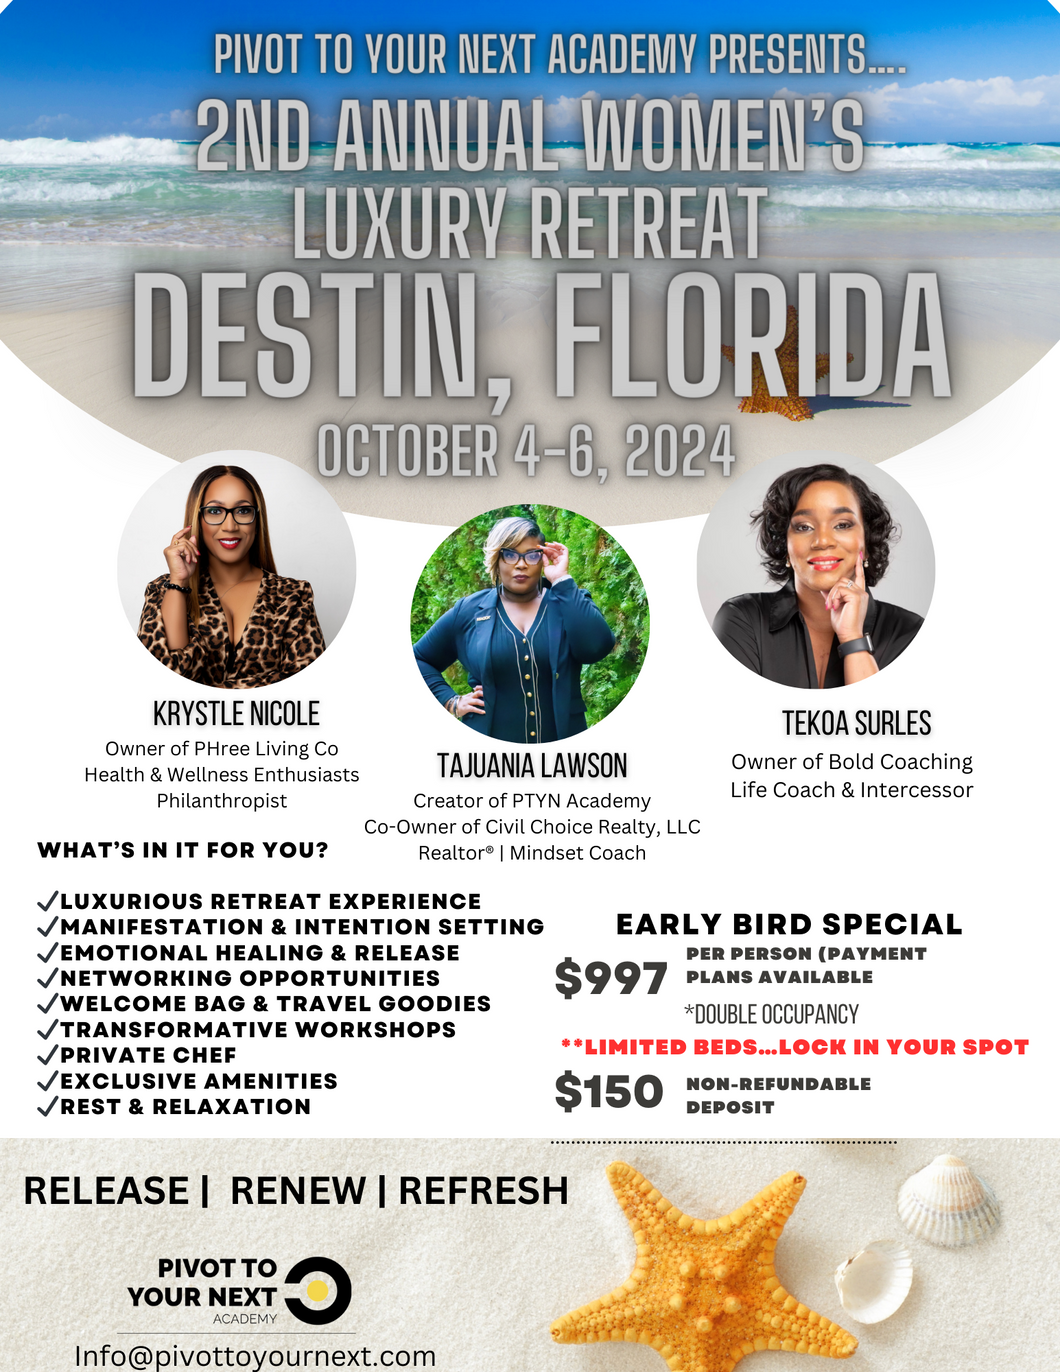 2nd Annual Pivot to Your Next Luxury Retreat October 4-6, 2024 (DEPOSIT)